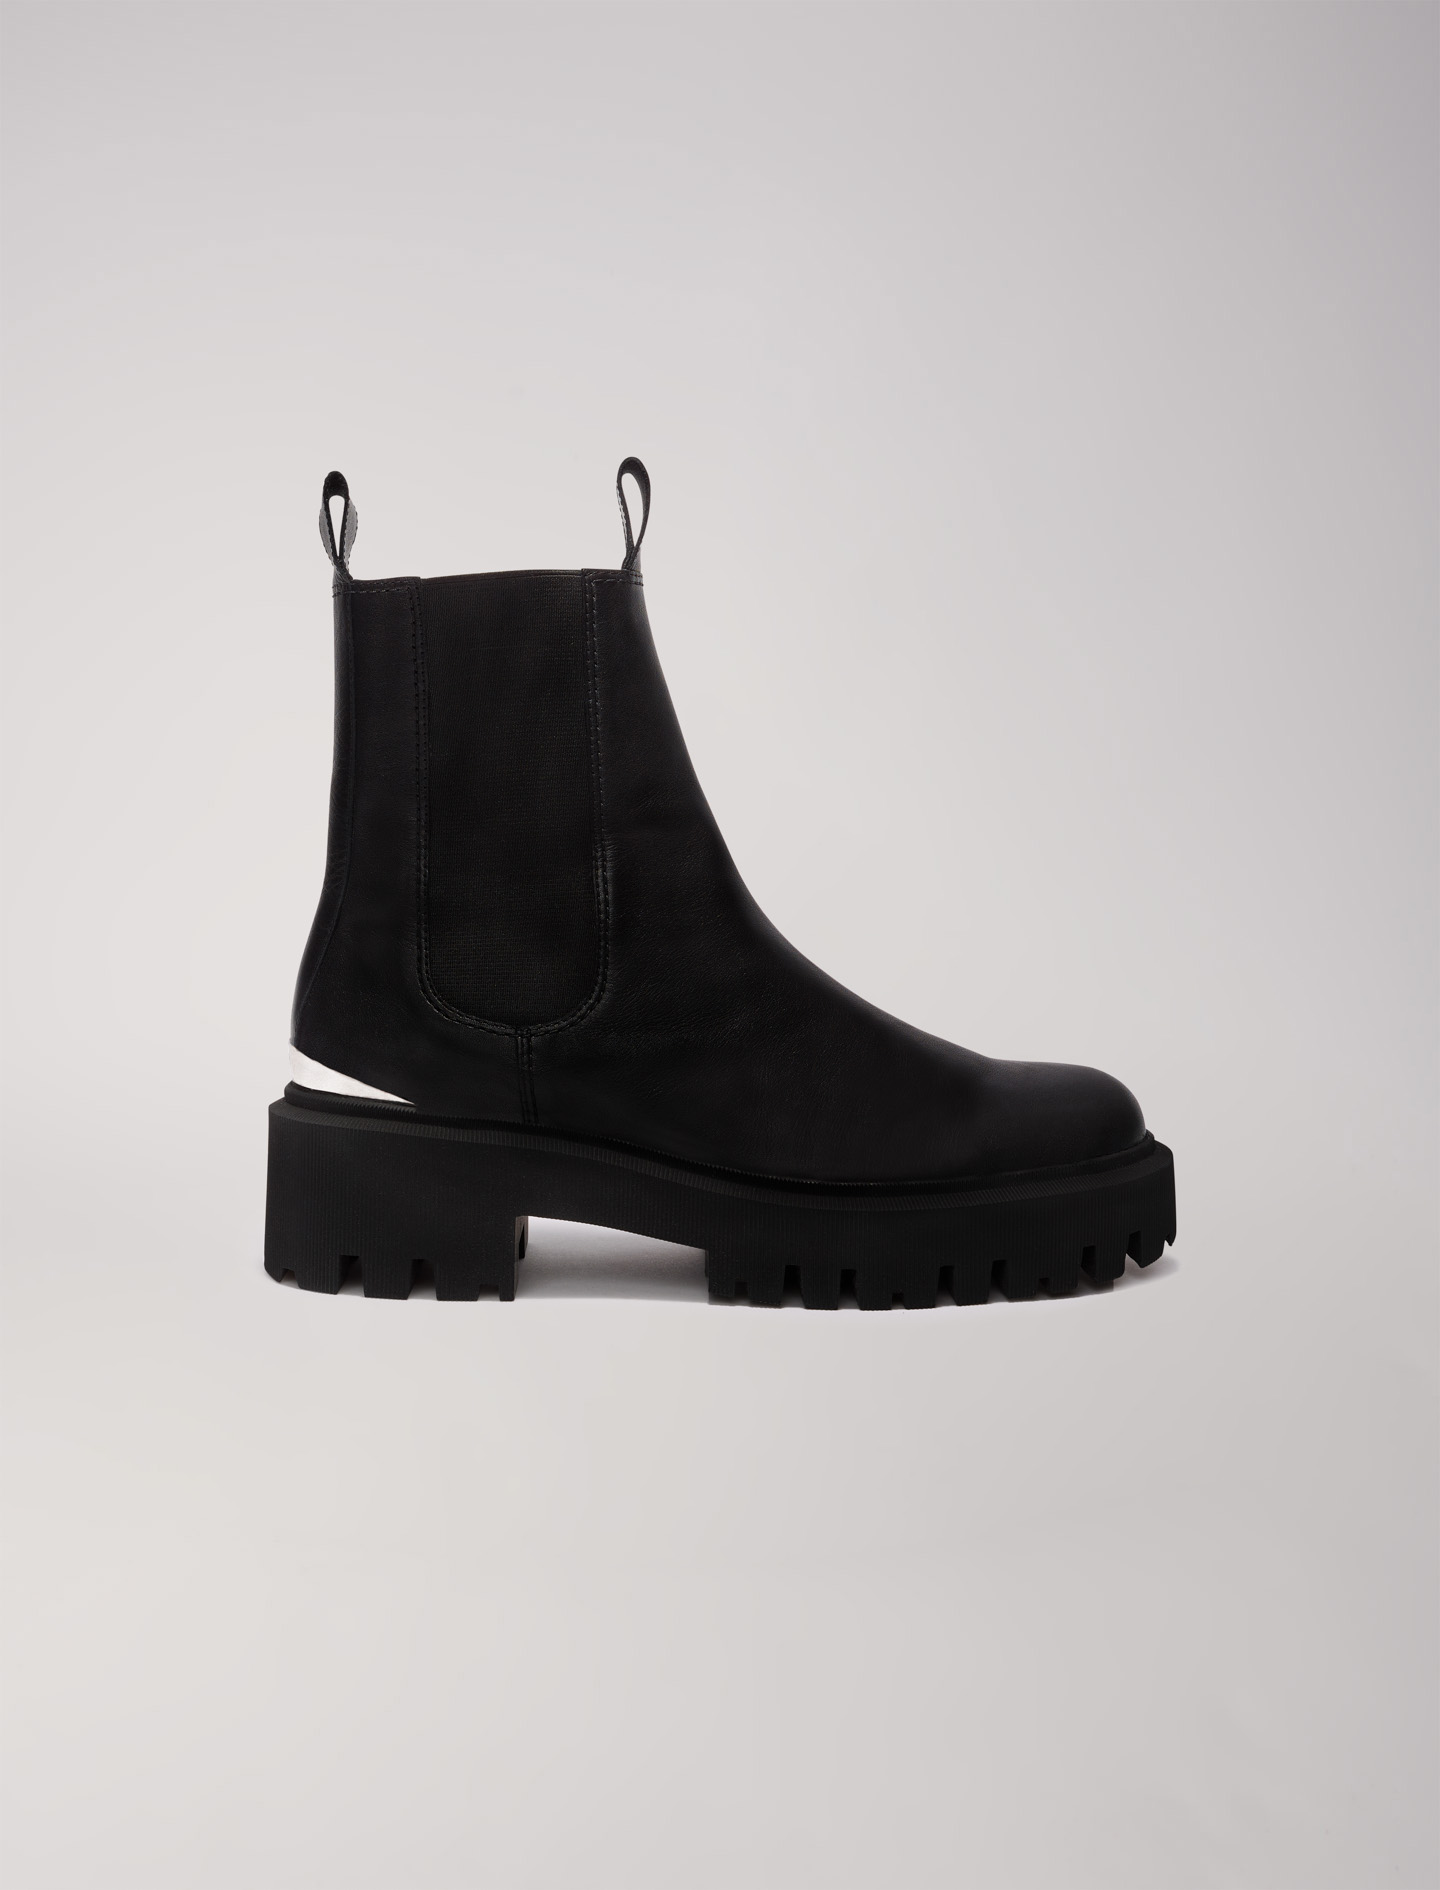 Maje Woman's goat Elastic: Chelsea boots with platform sole for Fall/Winter, in color Black / Black